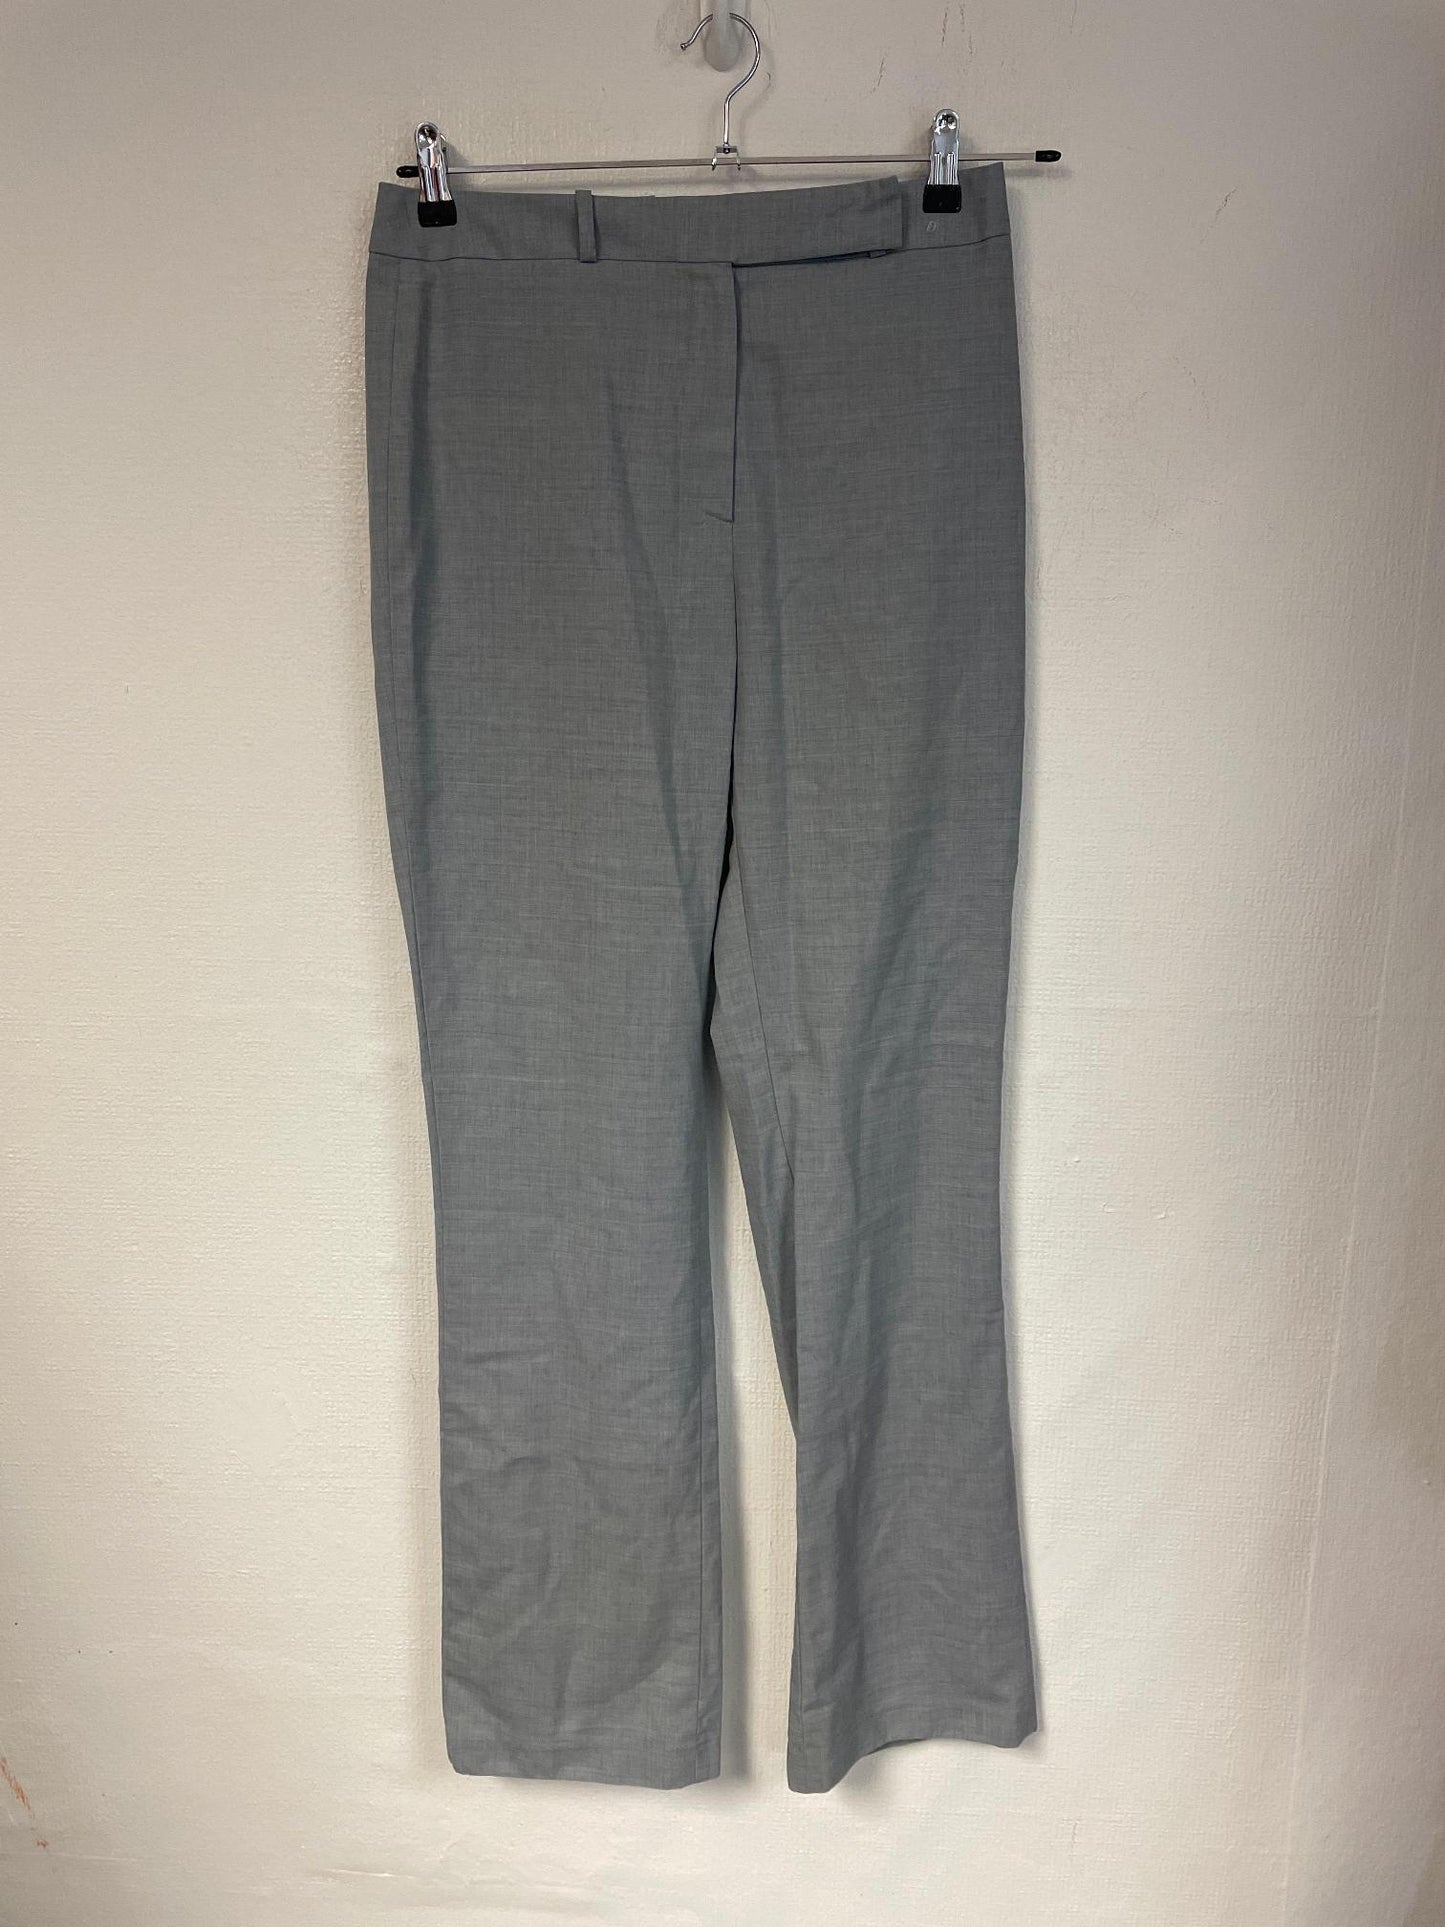 Grey tailored trousers (tall), size 10 - Damaged Item Sale